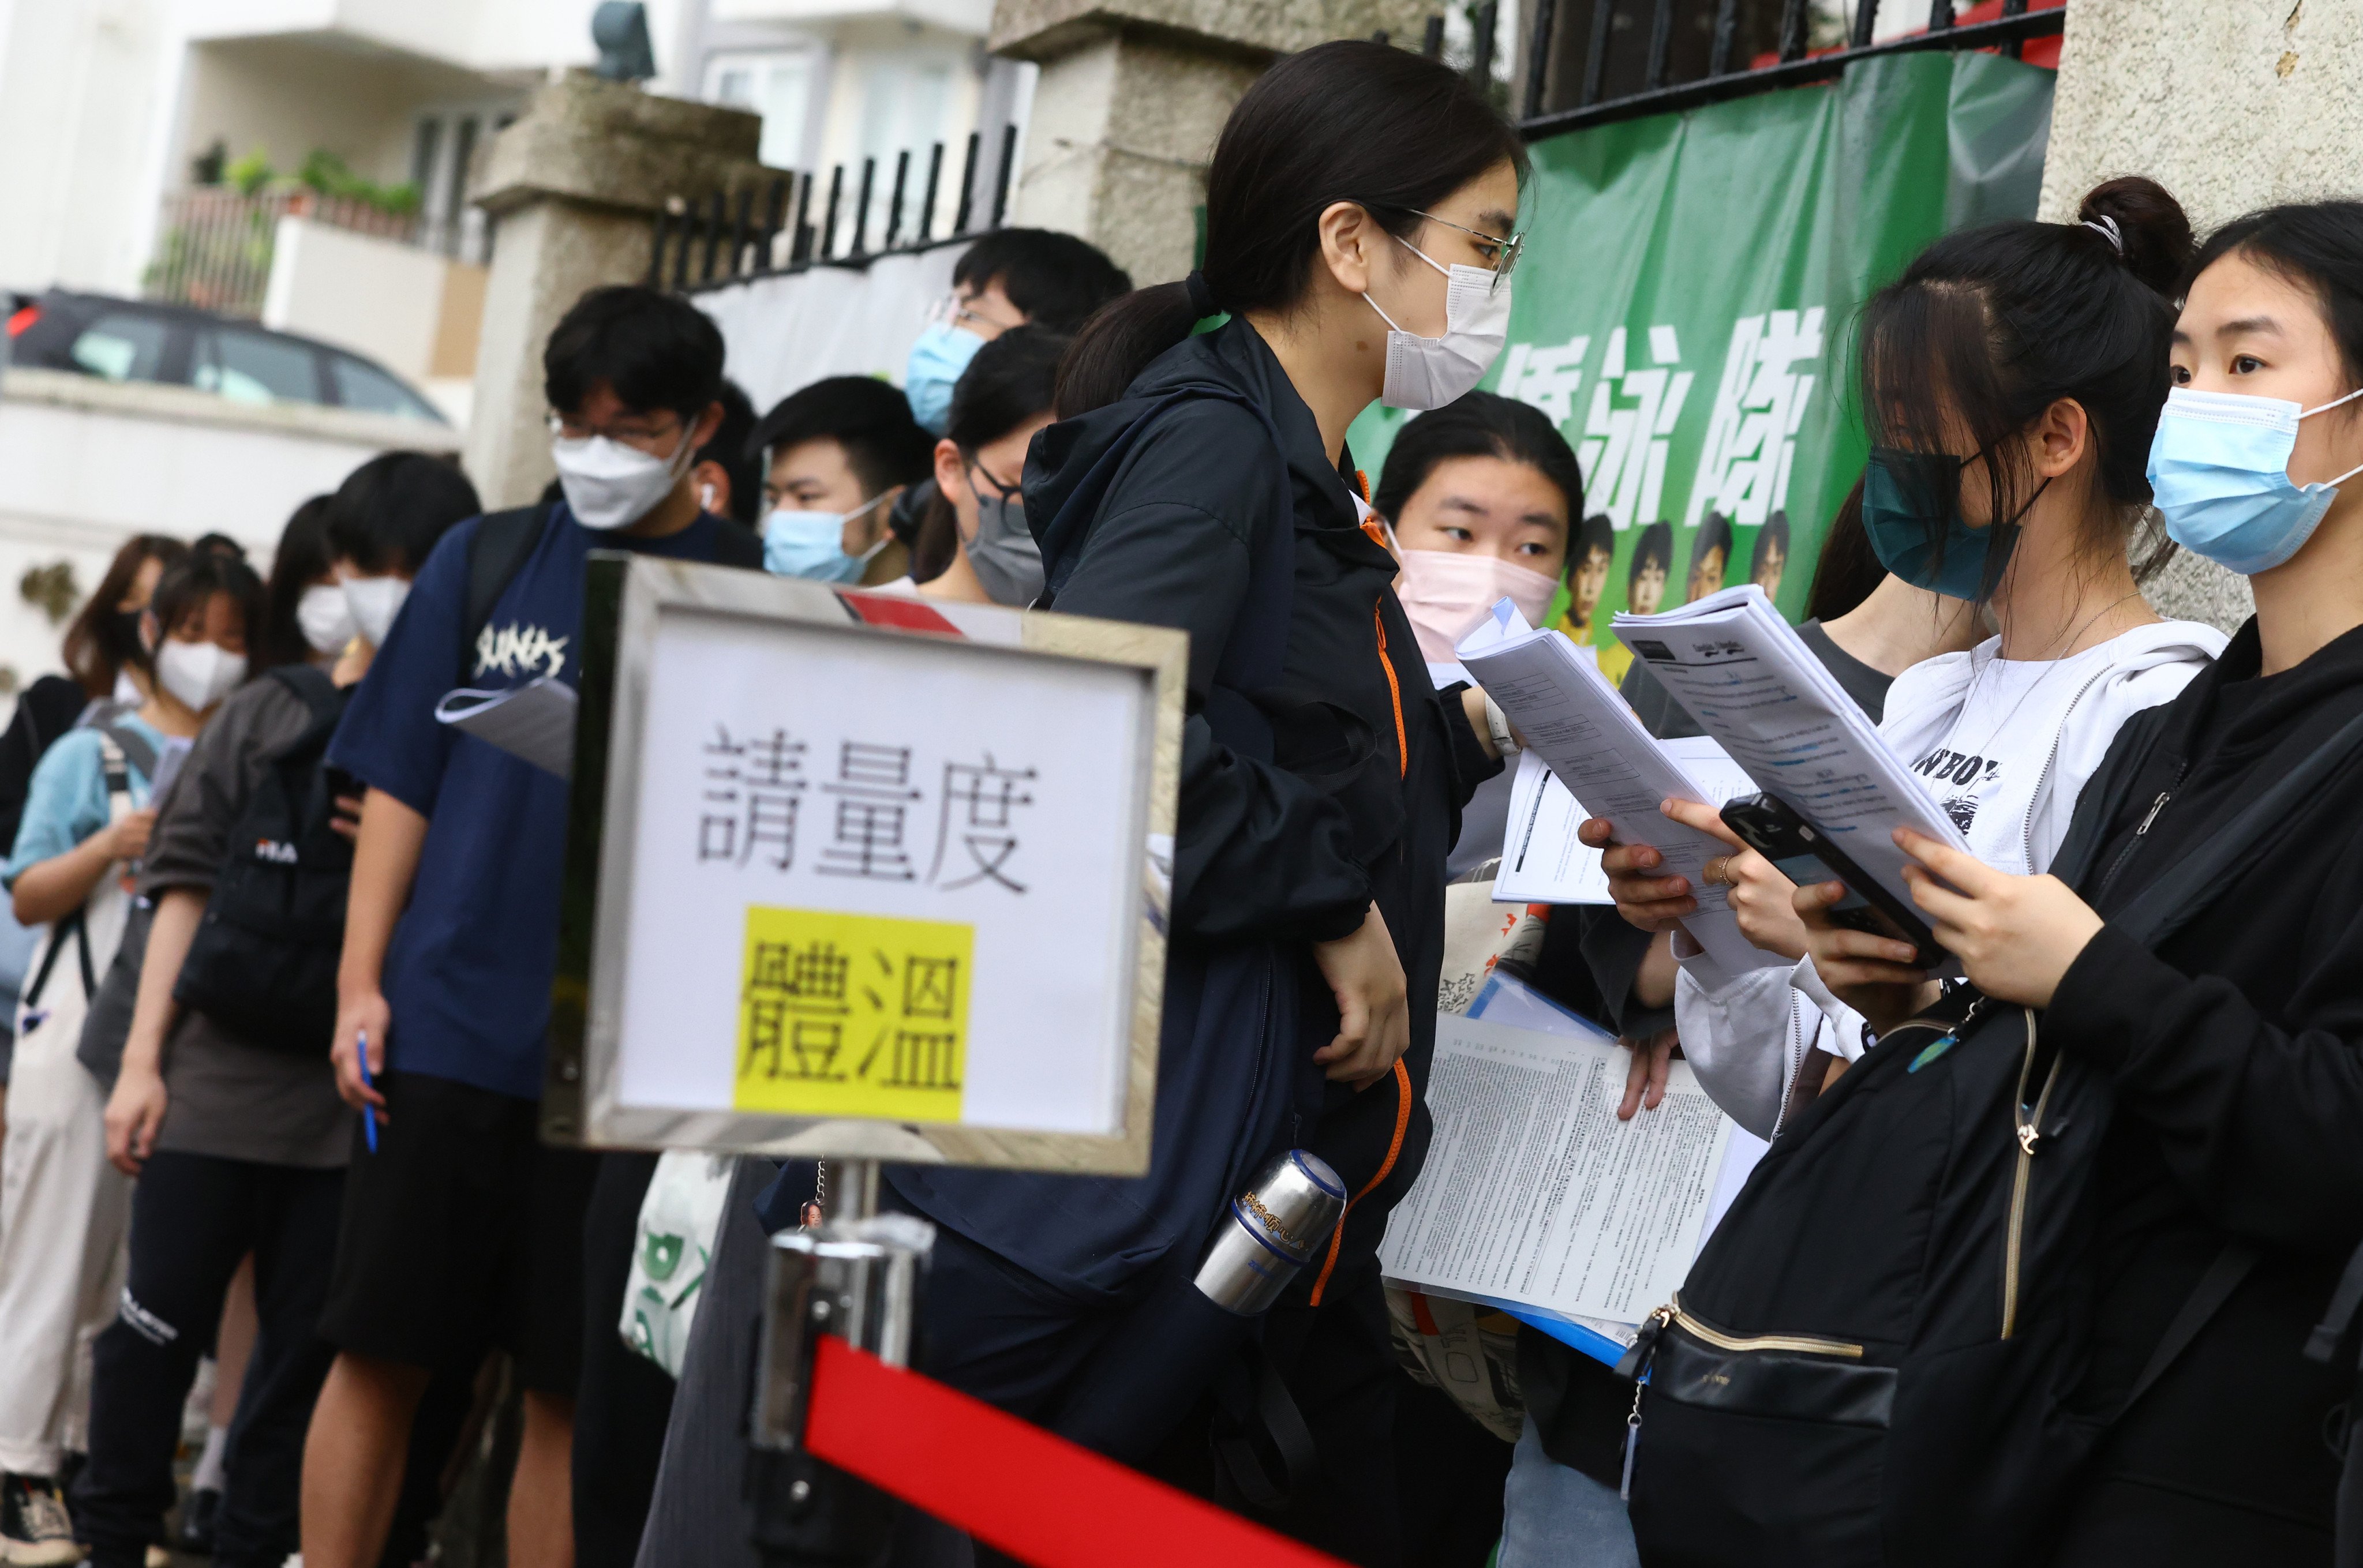 A sign reads in Chinese “Please take your temperature” as students wait to take the DSE English exam at a school in North Point in 2023. Photo: Dickson Lee